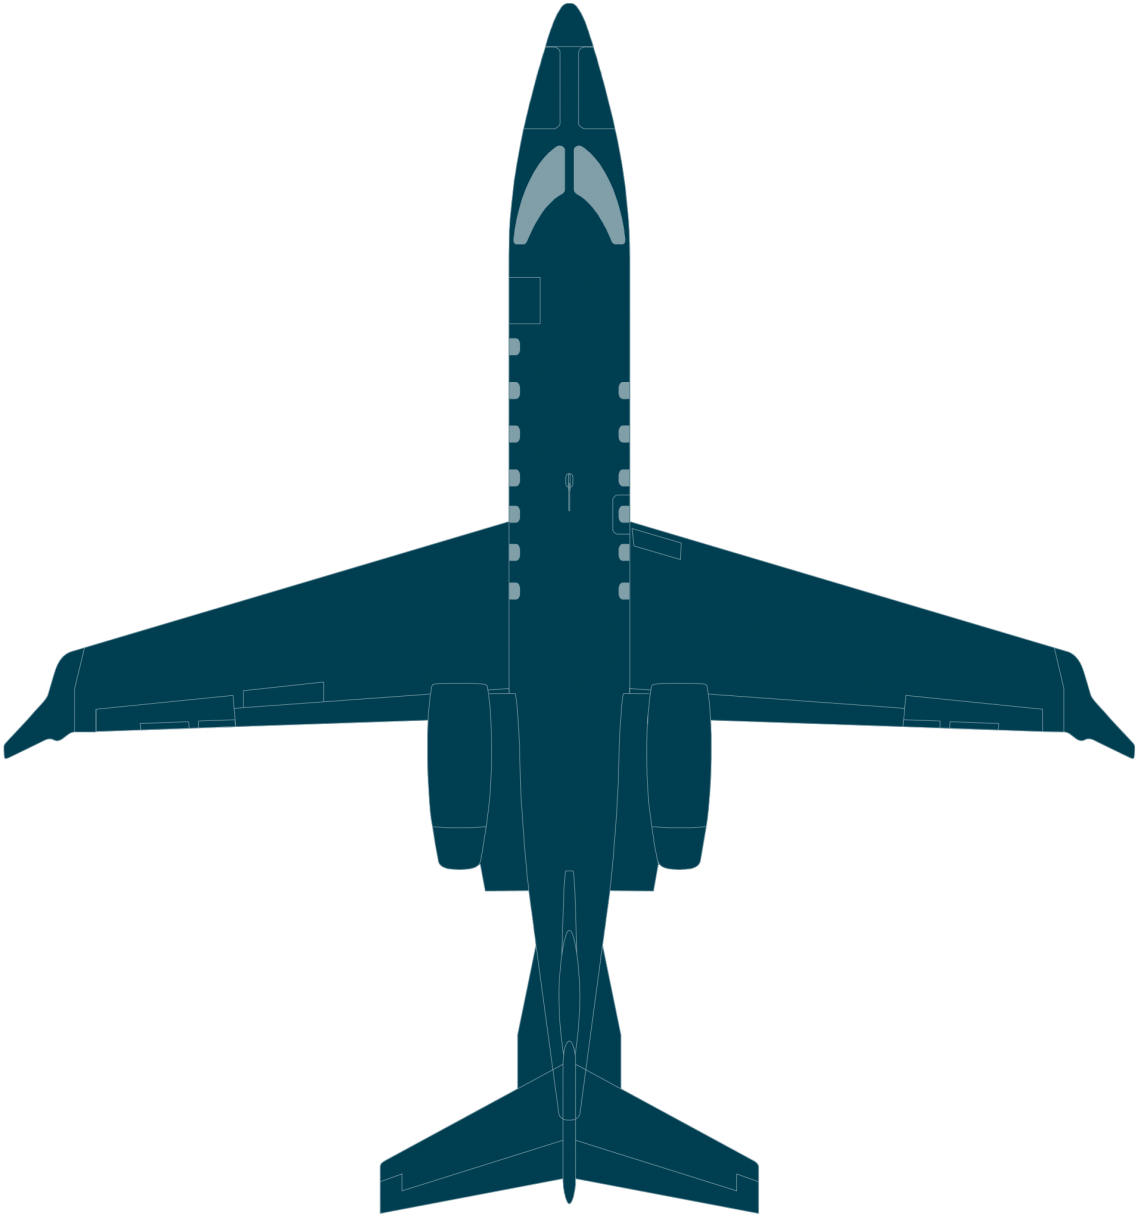 Learjet 70 Aircraft Top View - Top View Aircraft (1430x1430)